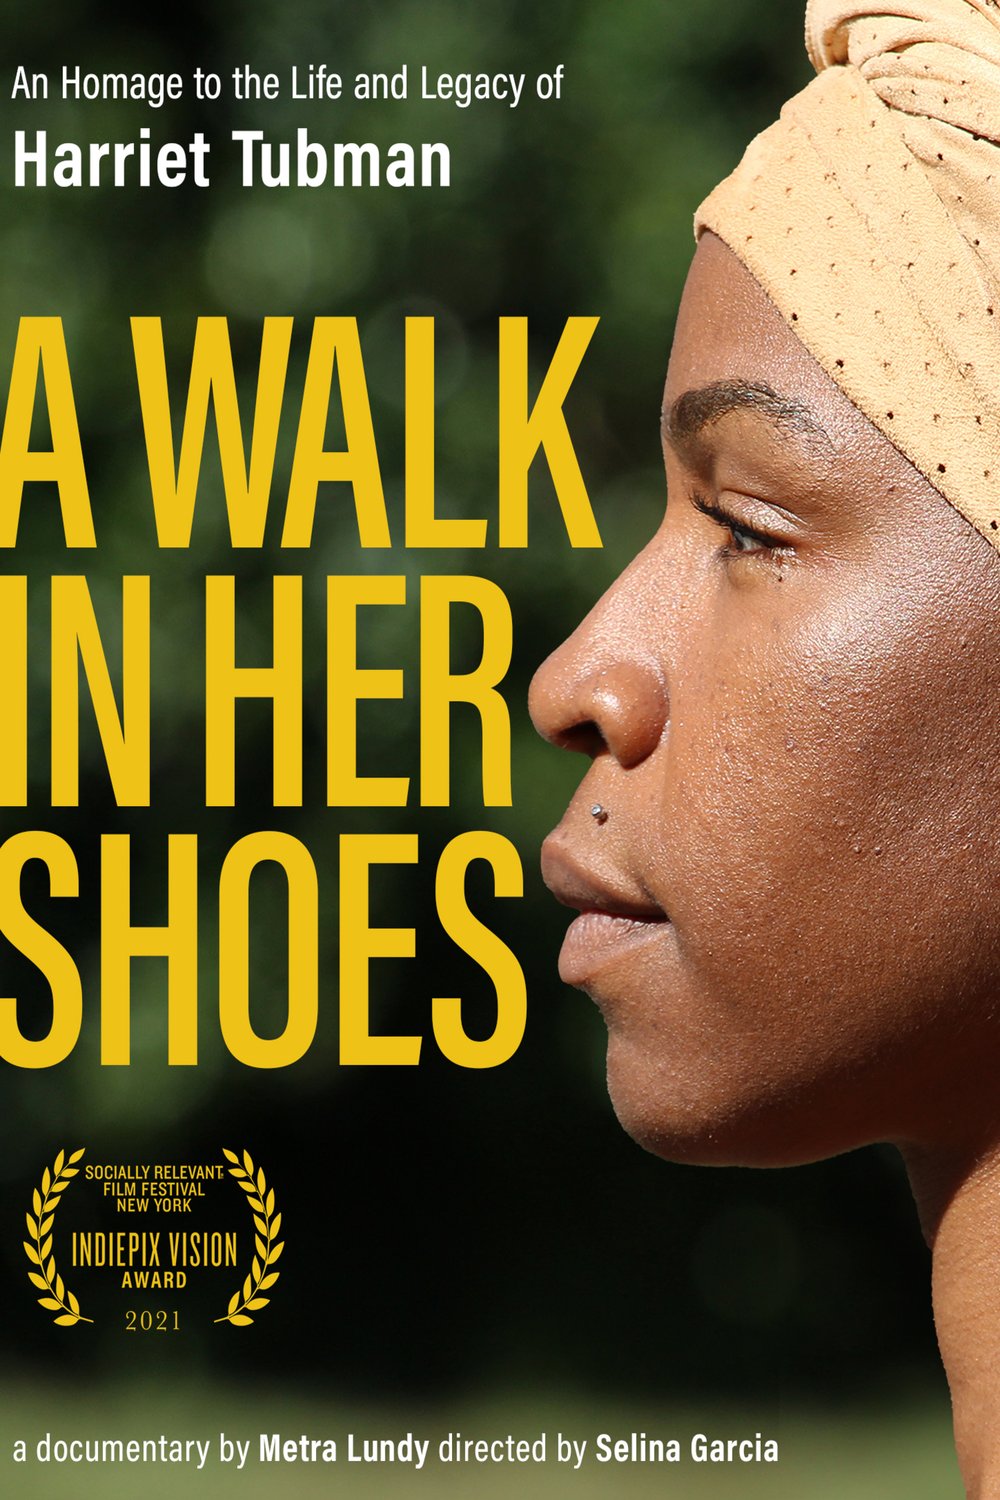 Poster of the movie A Walk in Her Shoes